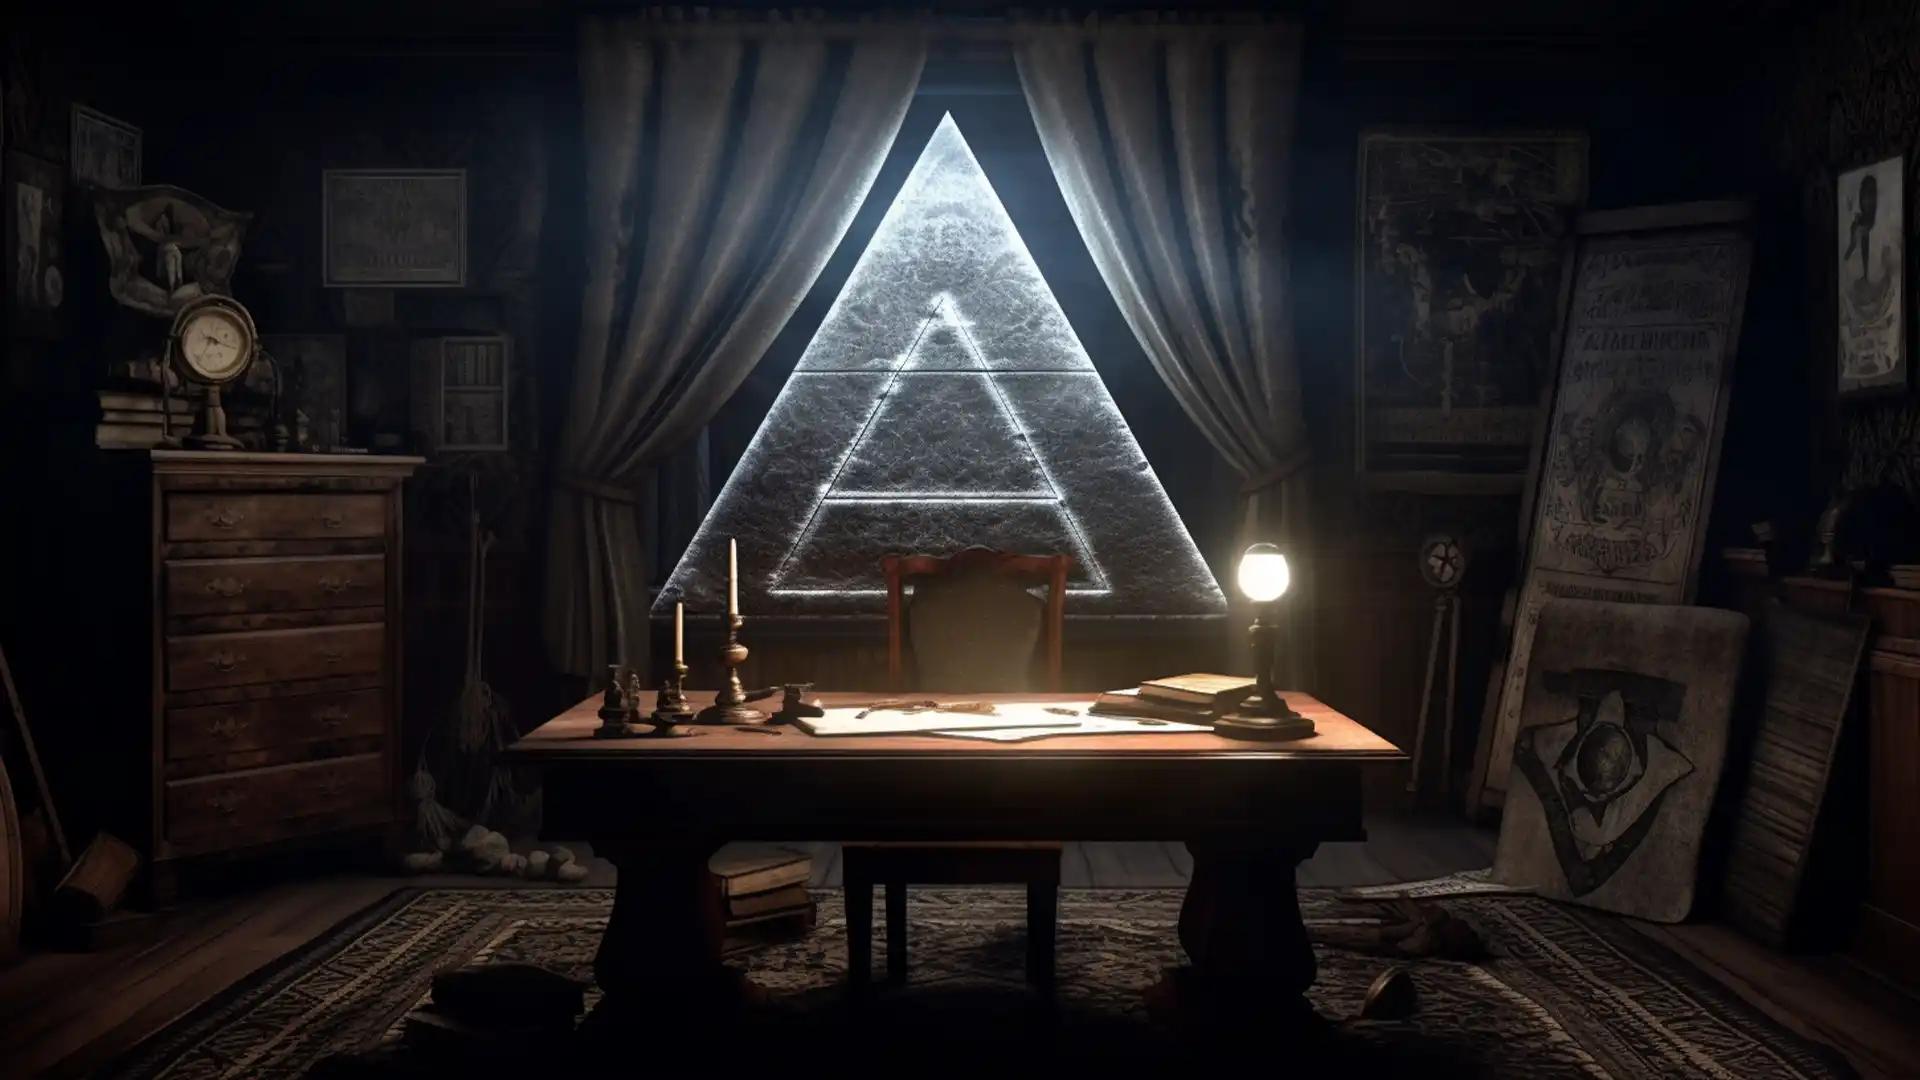 Is The Illuminati Real or a Myth? - Dimly lit room with an antique wooden desk, an open aged book displaying the Eye of Providence symbol, and dramatic moonlit shadows.